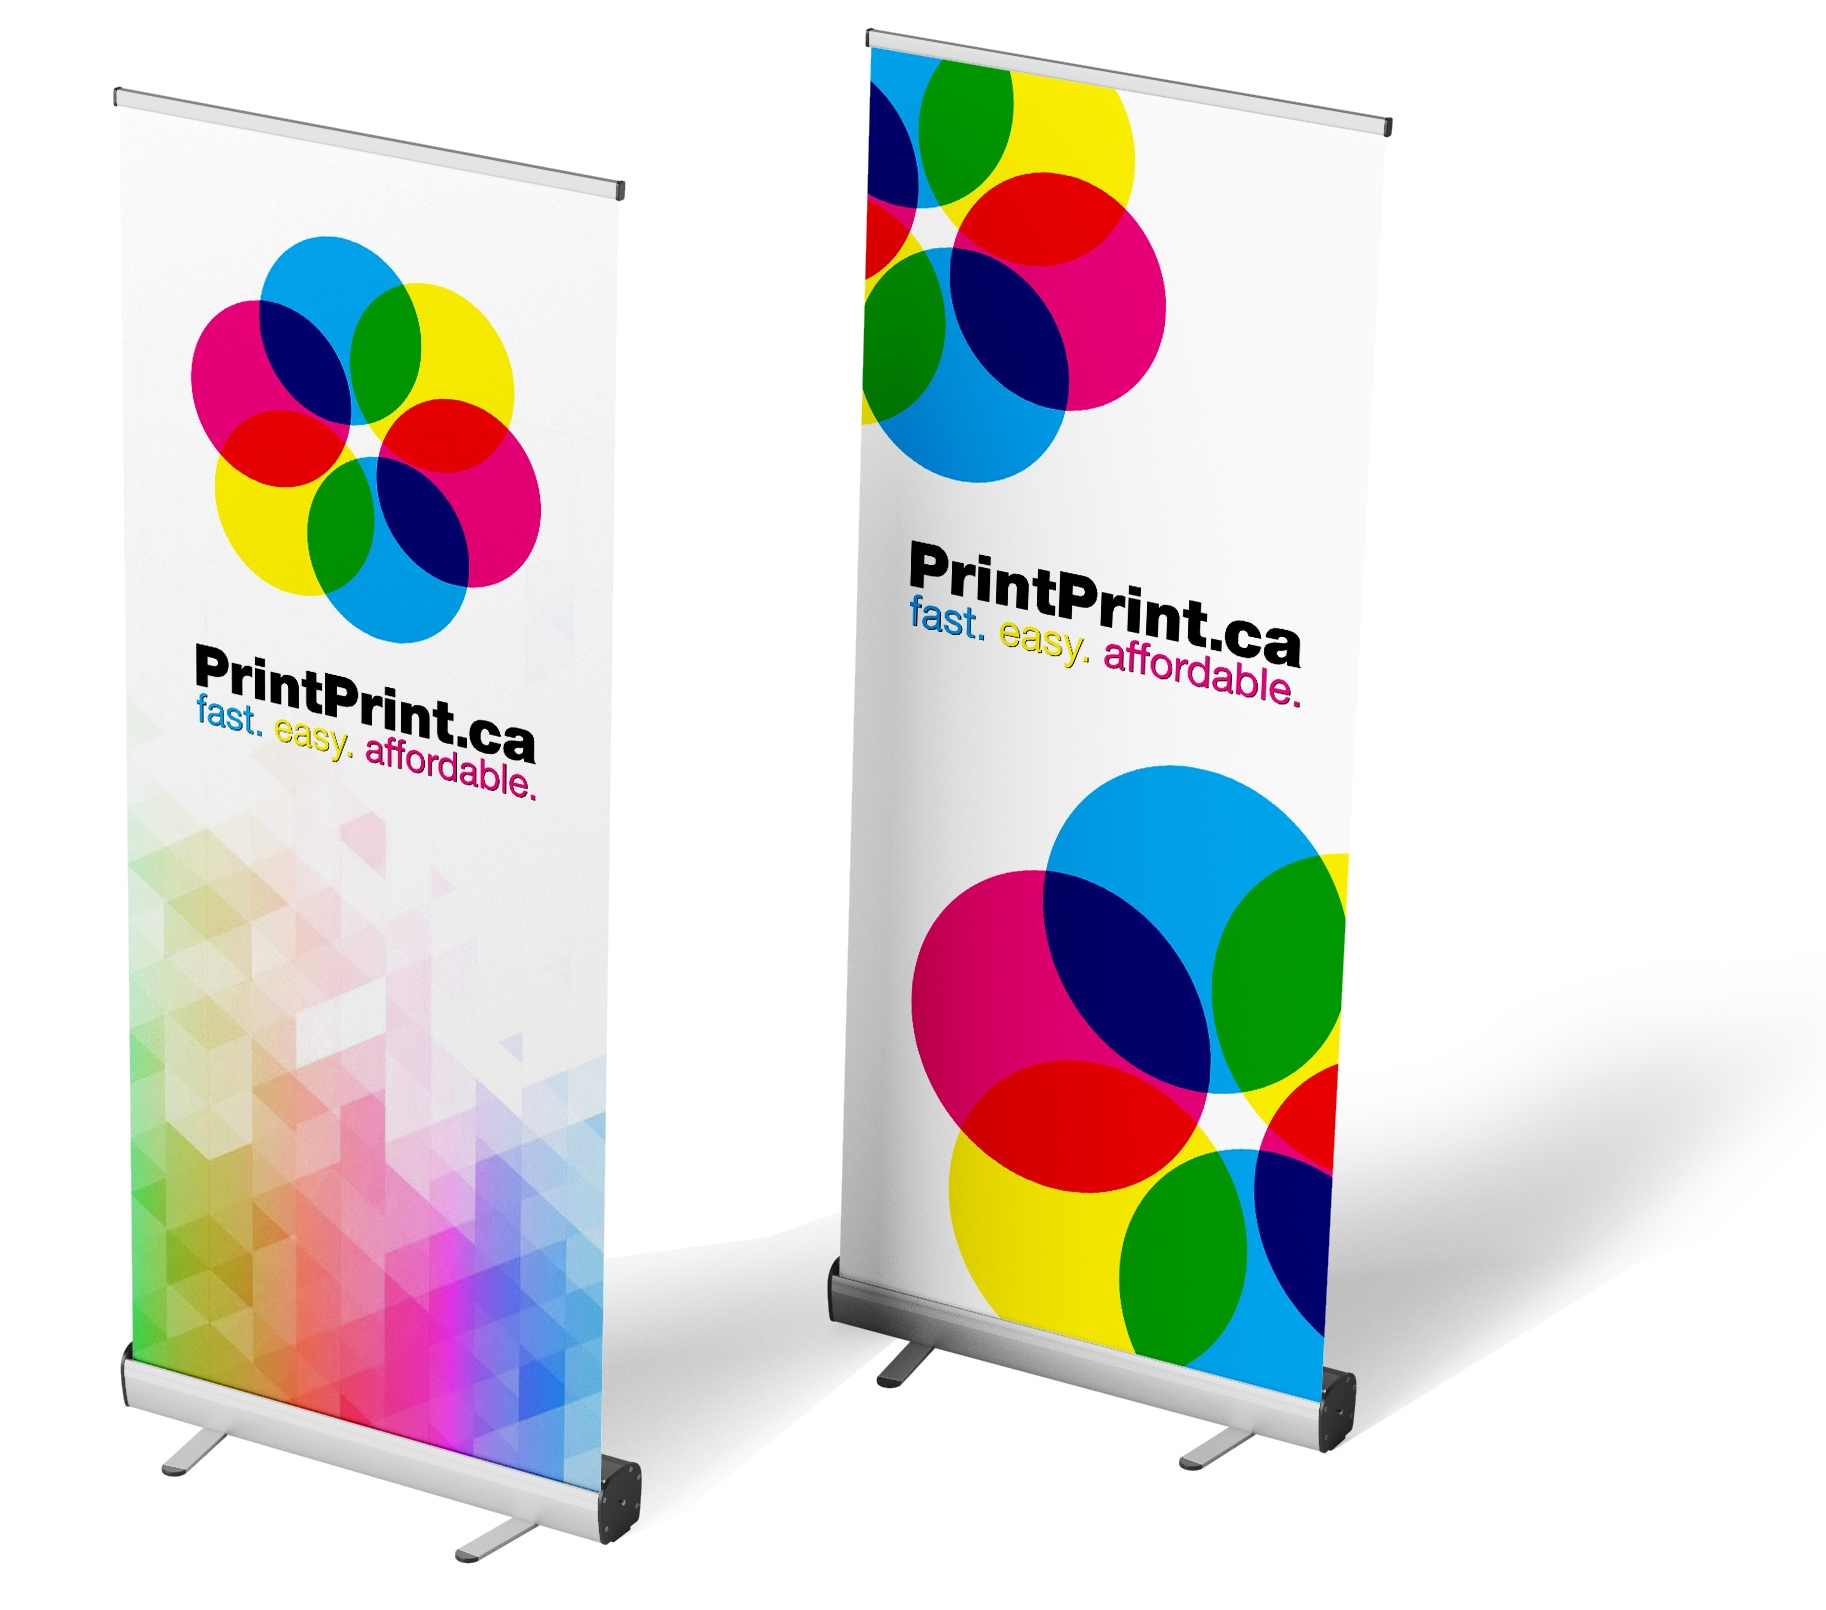 Banners Vancouver - PrintPrint.ca Vancouver